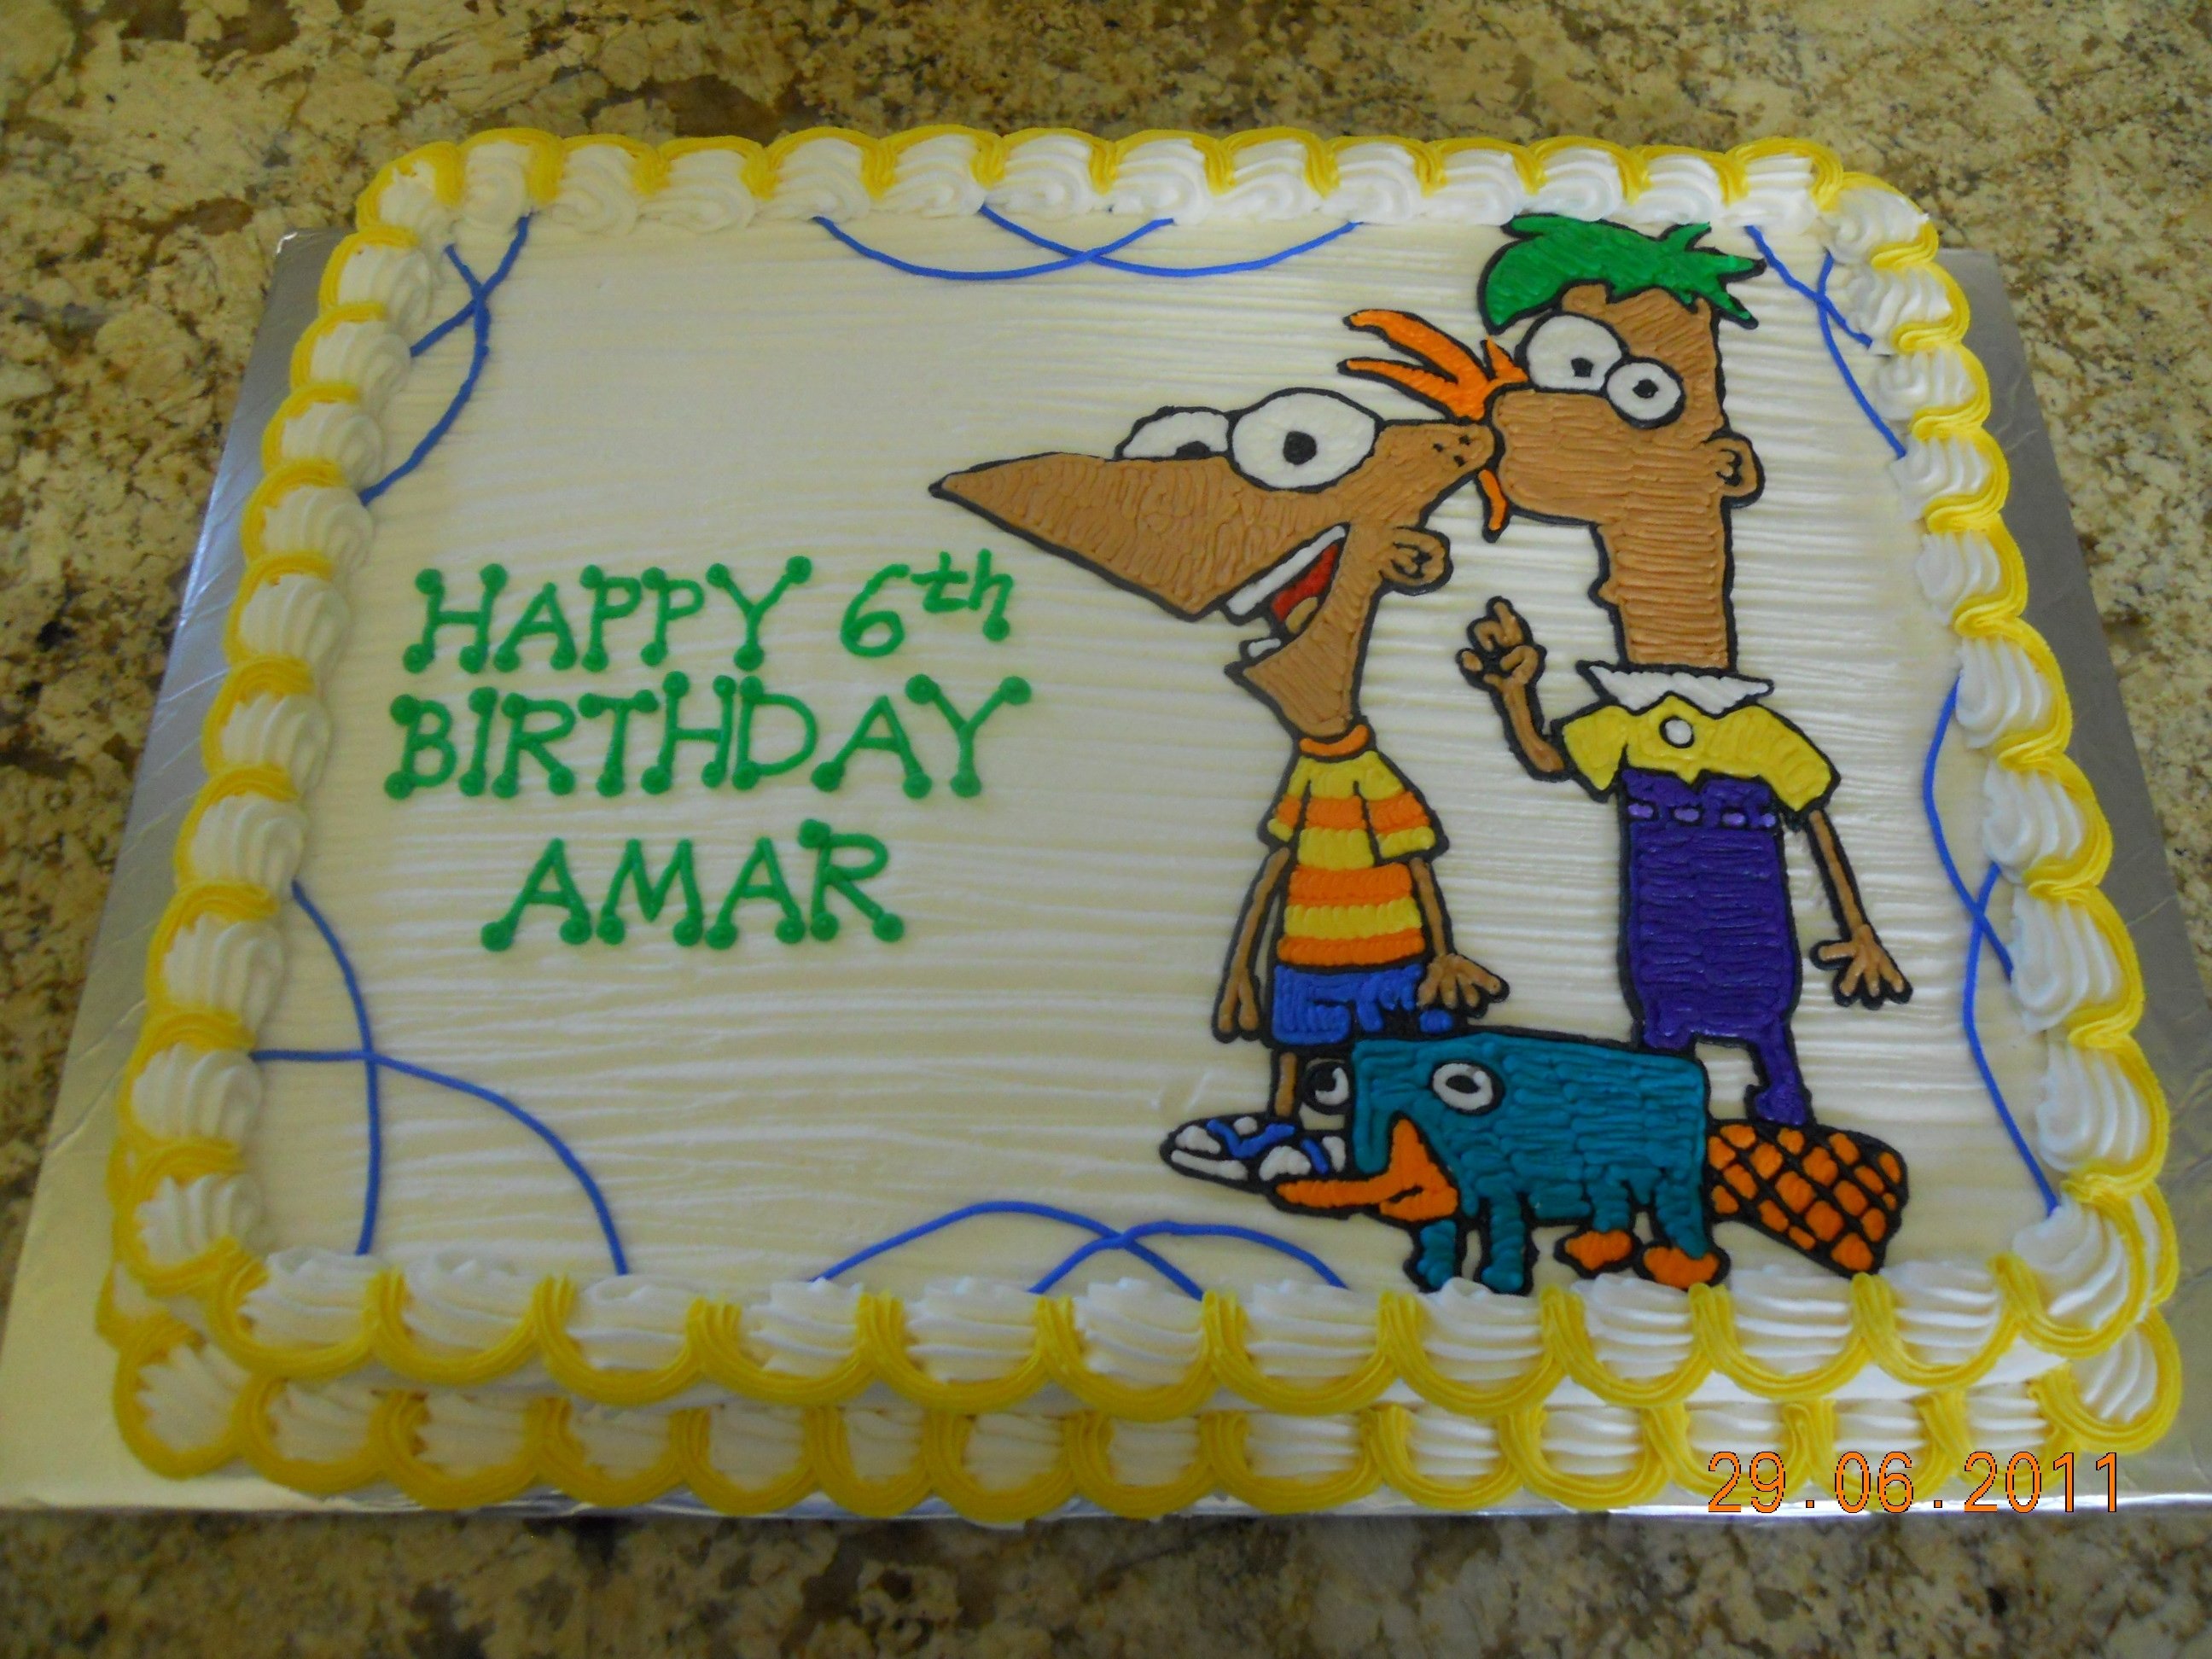 10 Elegant Phineas And Ferb Birthday Party Ideas phineas and ferb cakes decoration ideas little birthday cakes 2022